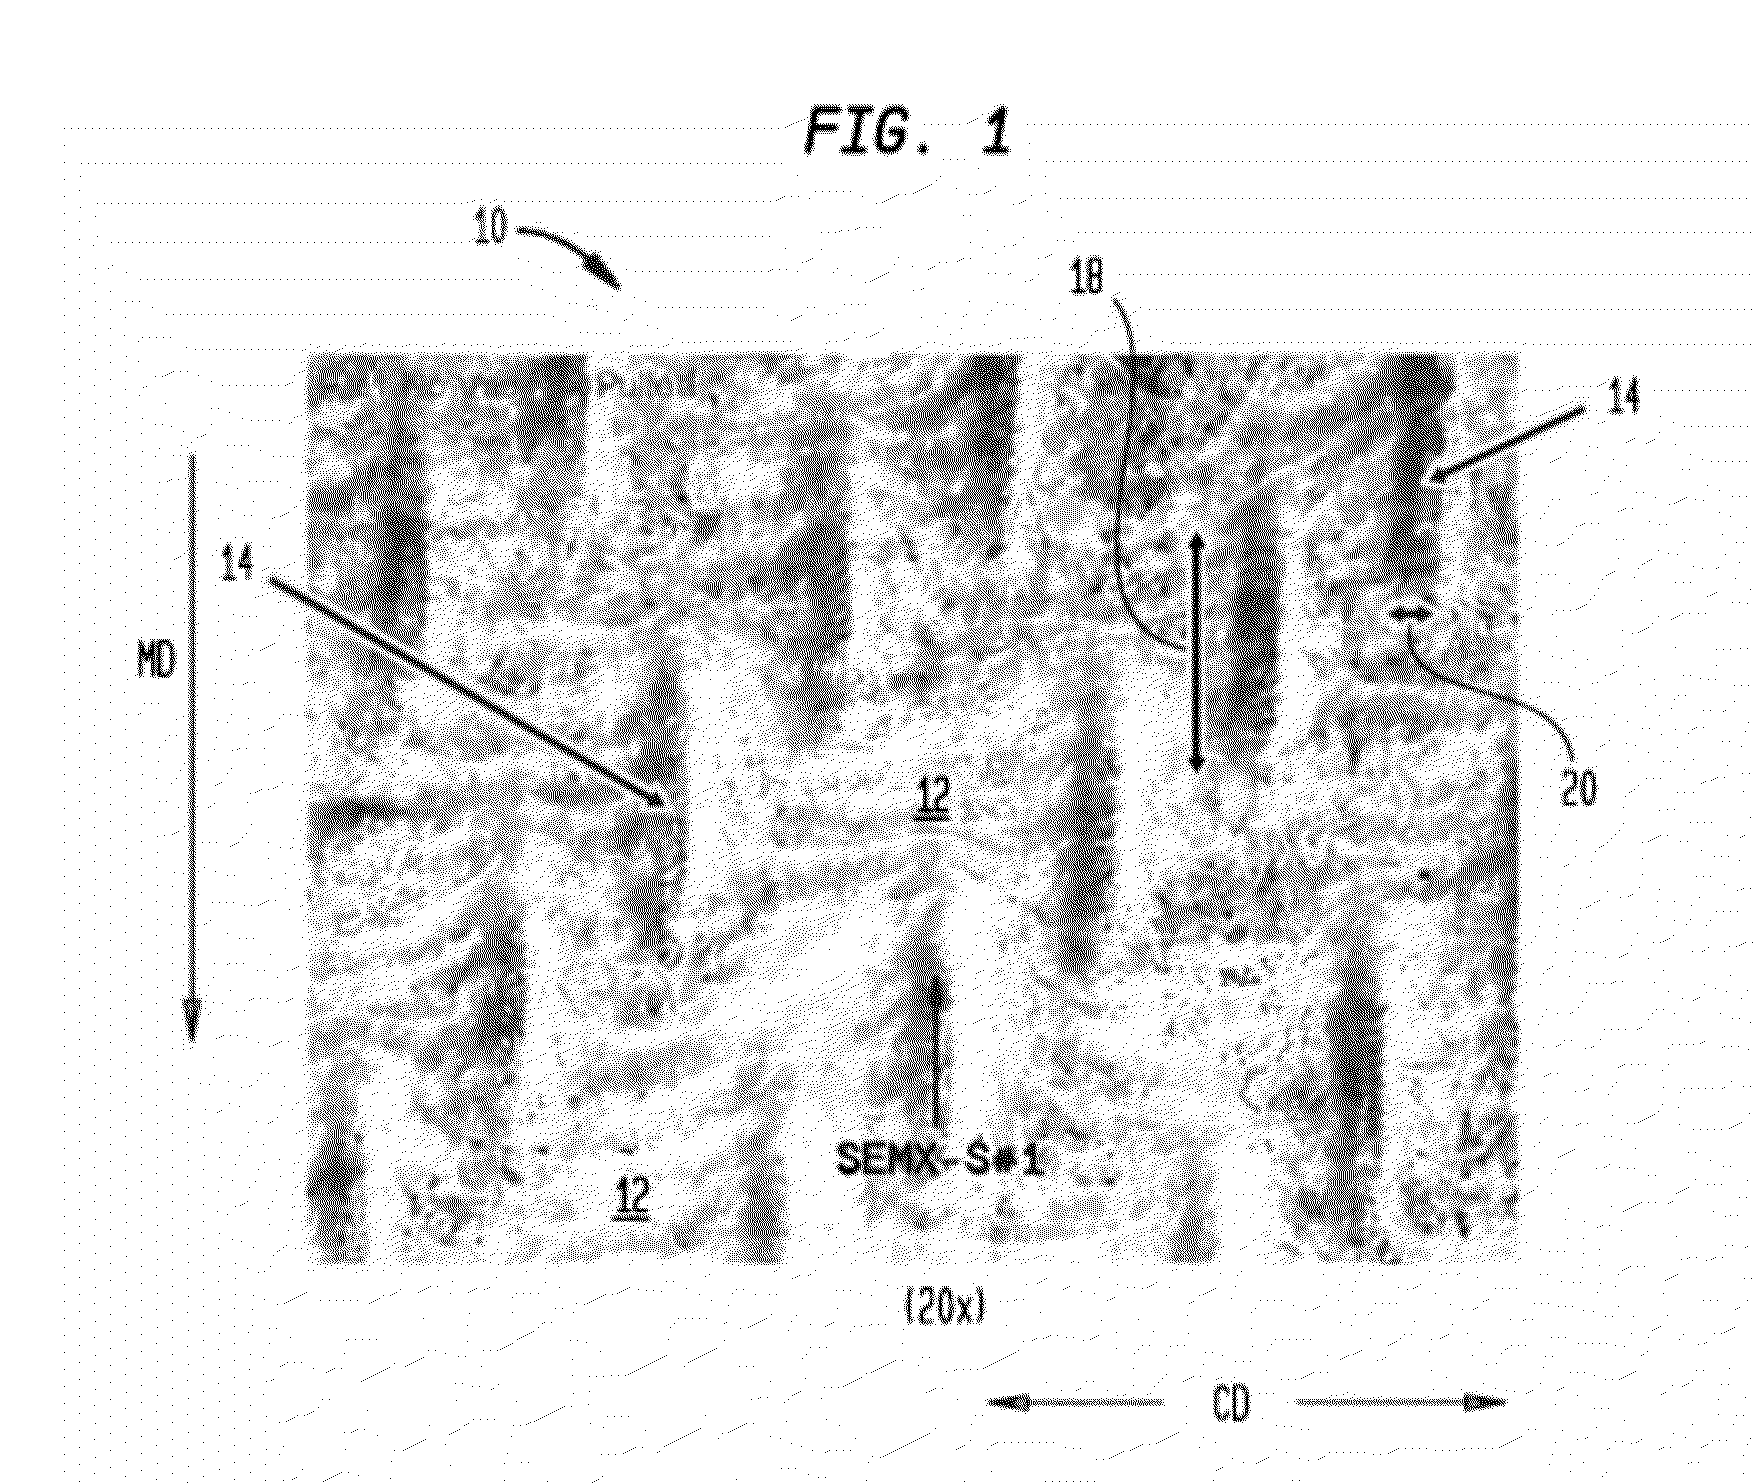 Absorbent Sheet of Cellulosic Fibers